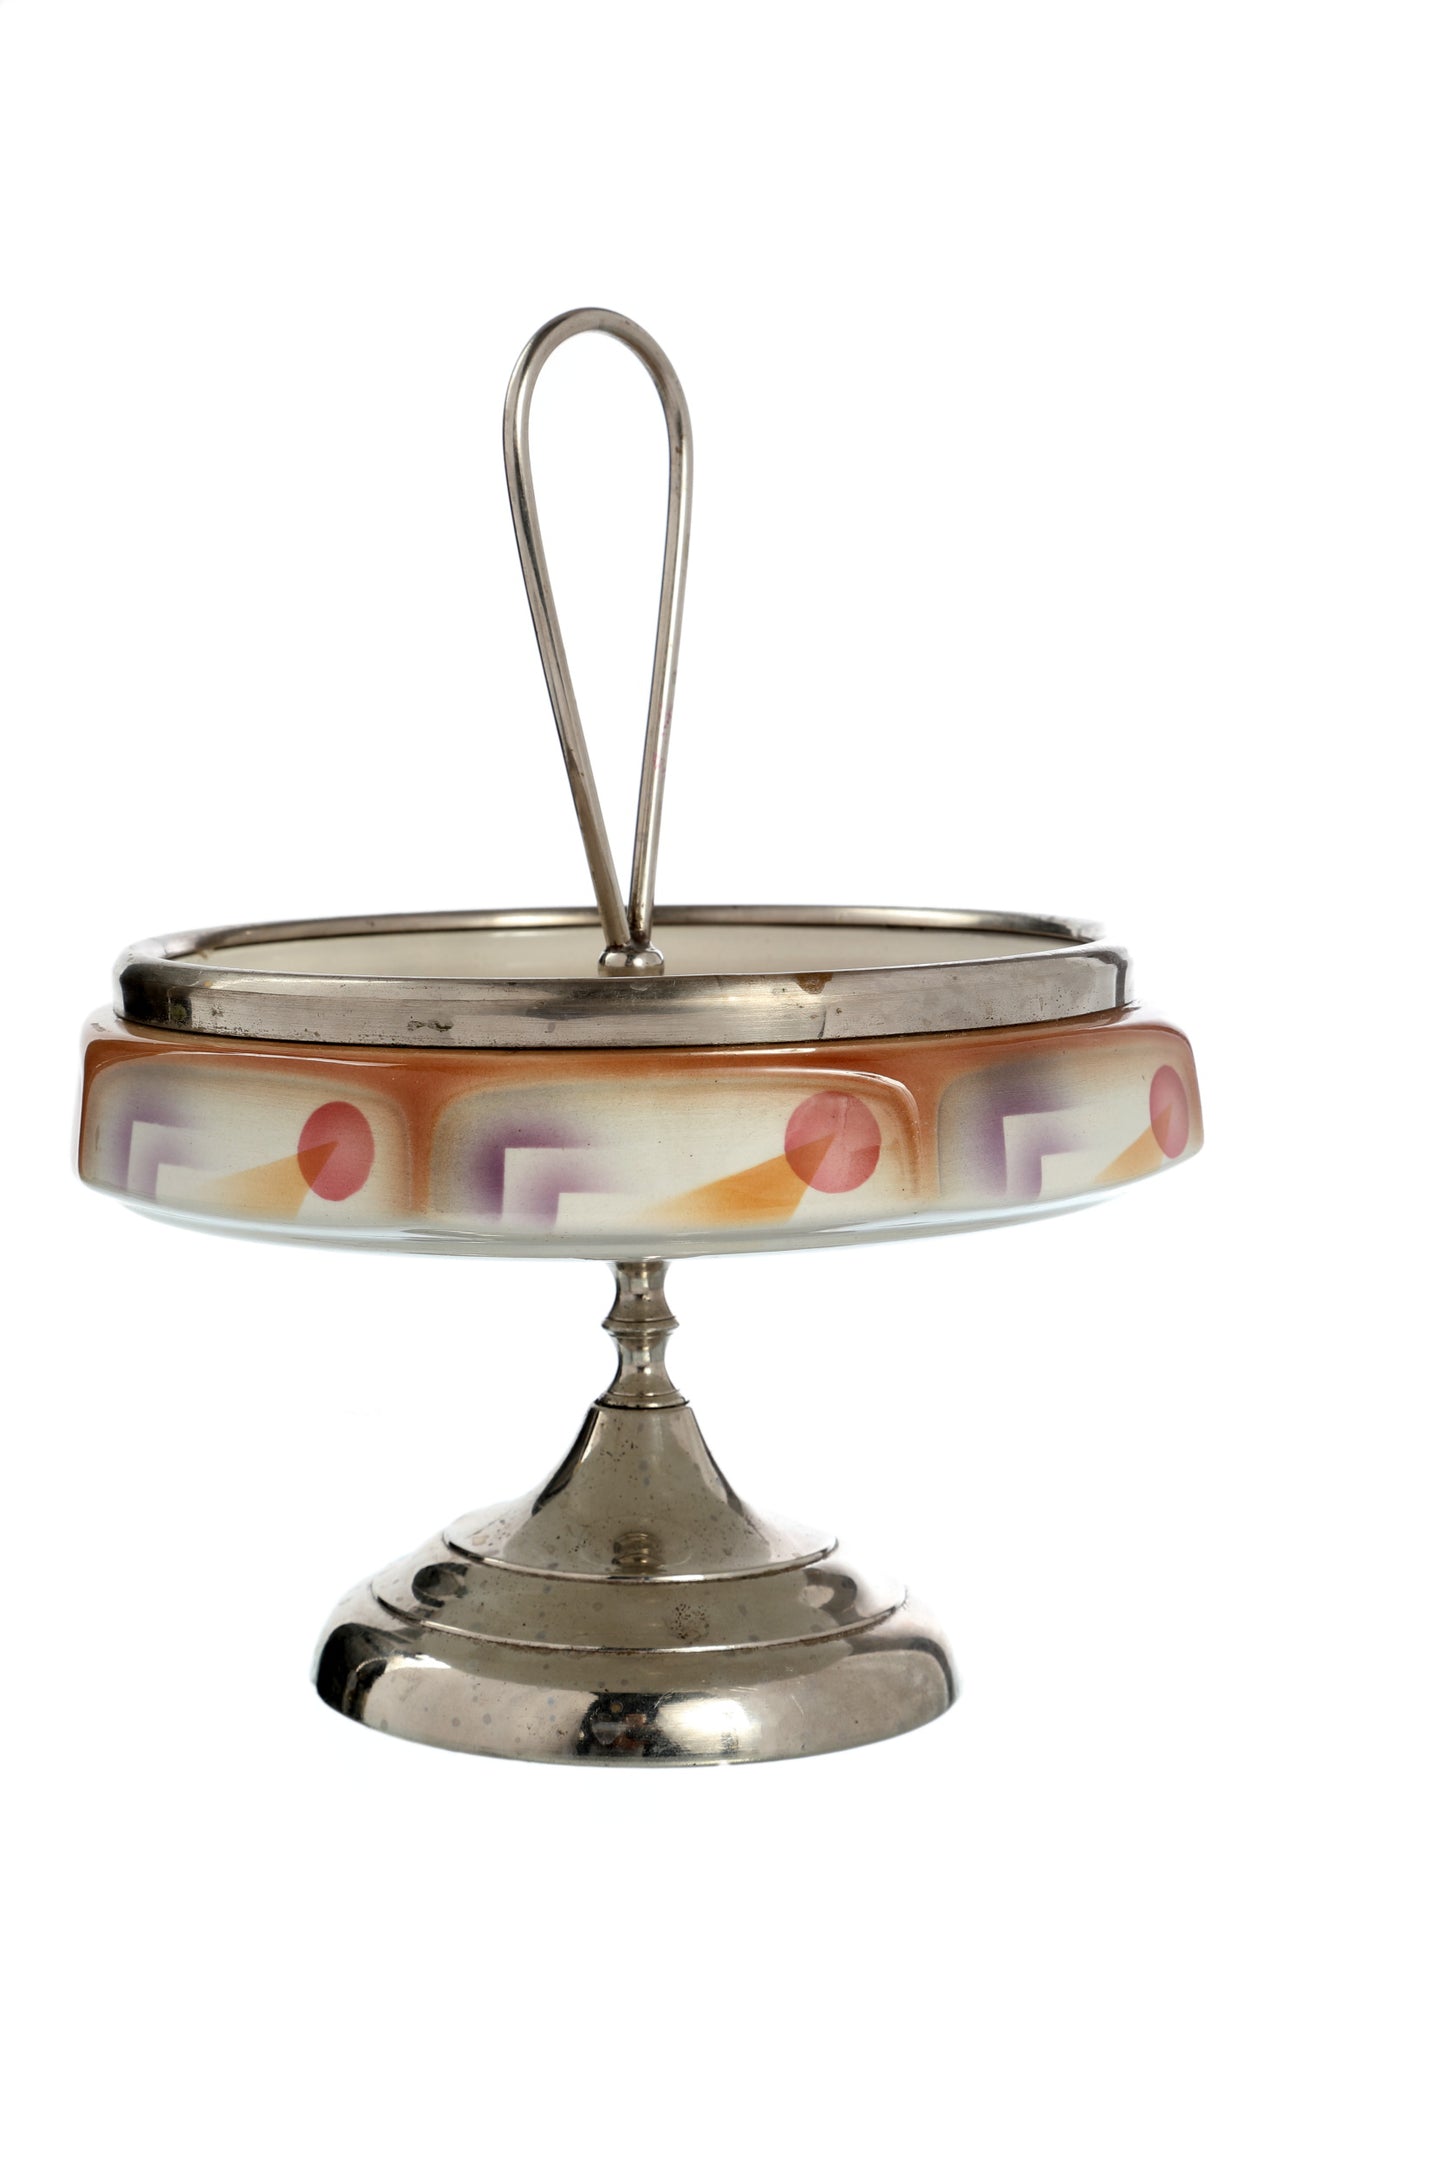 Futurist cake stand from the 1930s